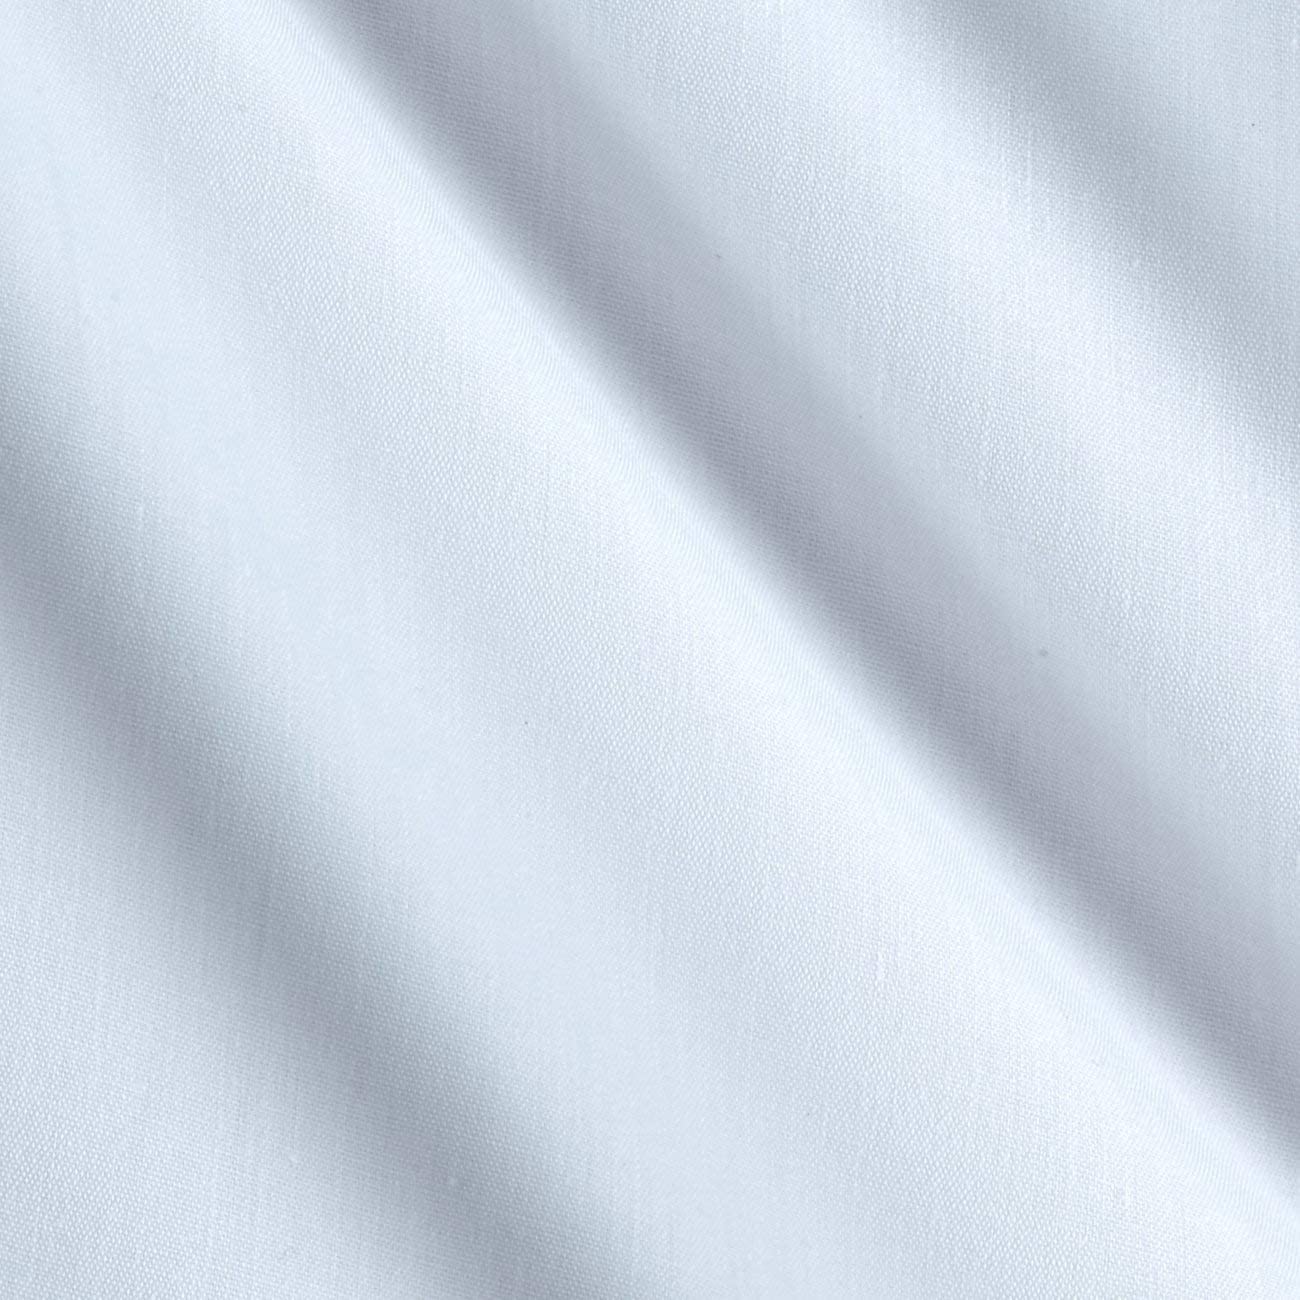 Premium Light Weight Poly Cotton Blend Broadcloth Fabric, Good to Make Face Mask Fabric (White, 1 Yard)